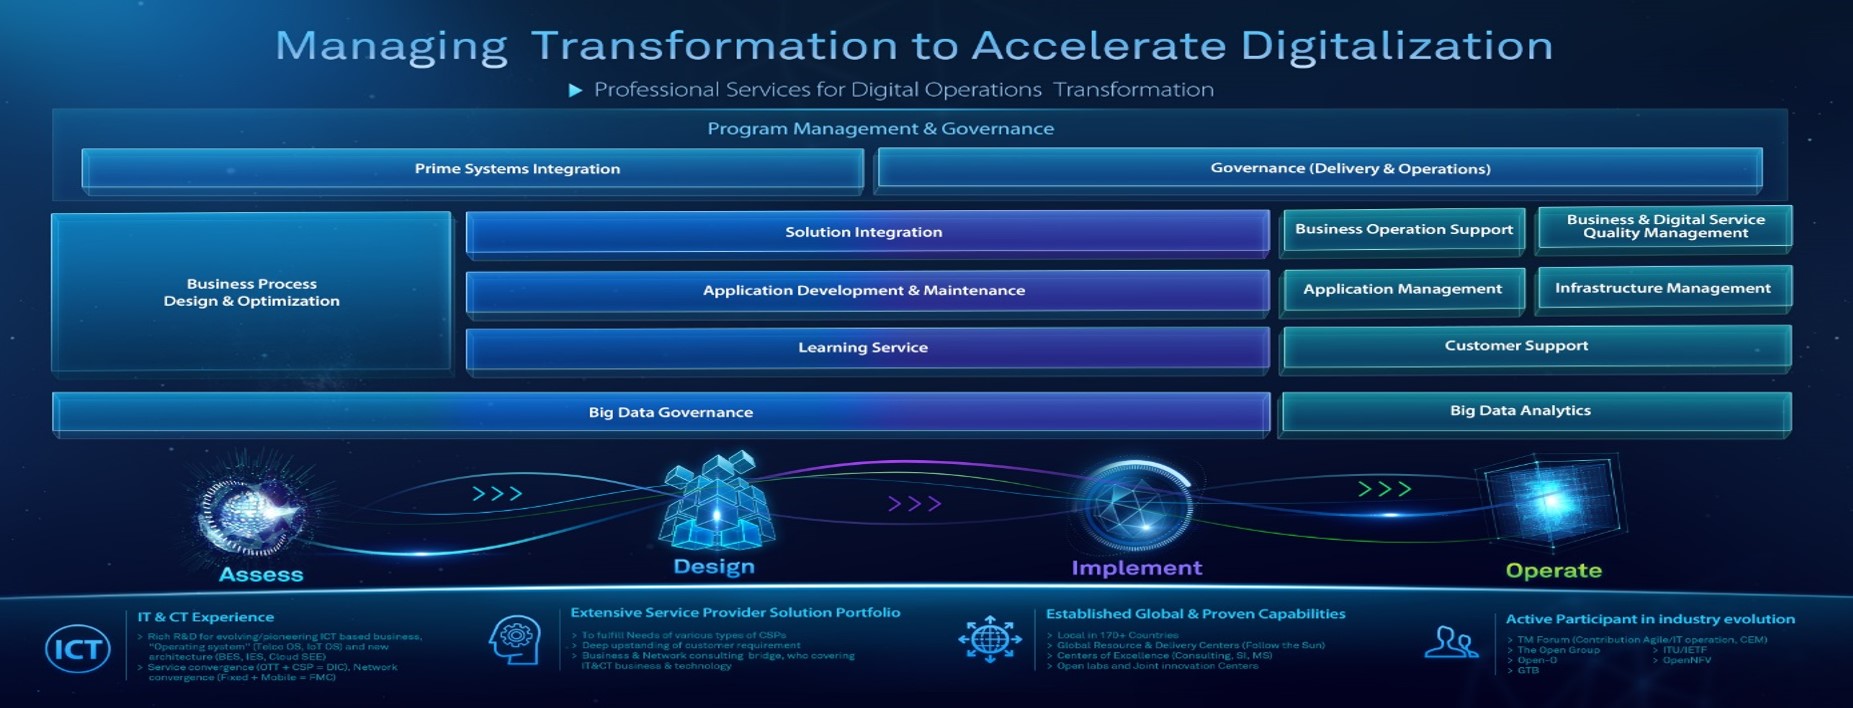 Huawei's Managed Transformation Offering